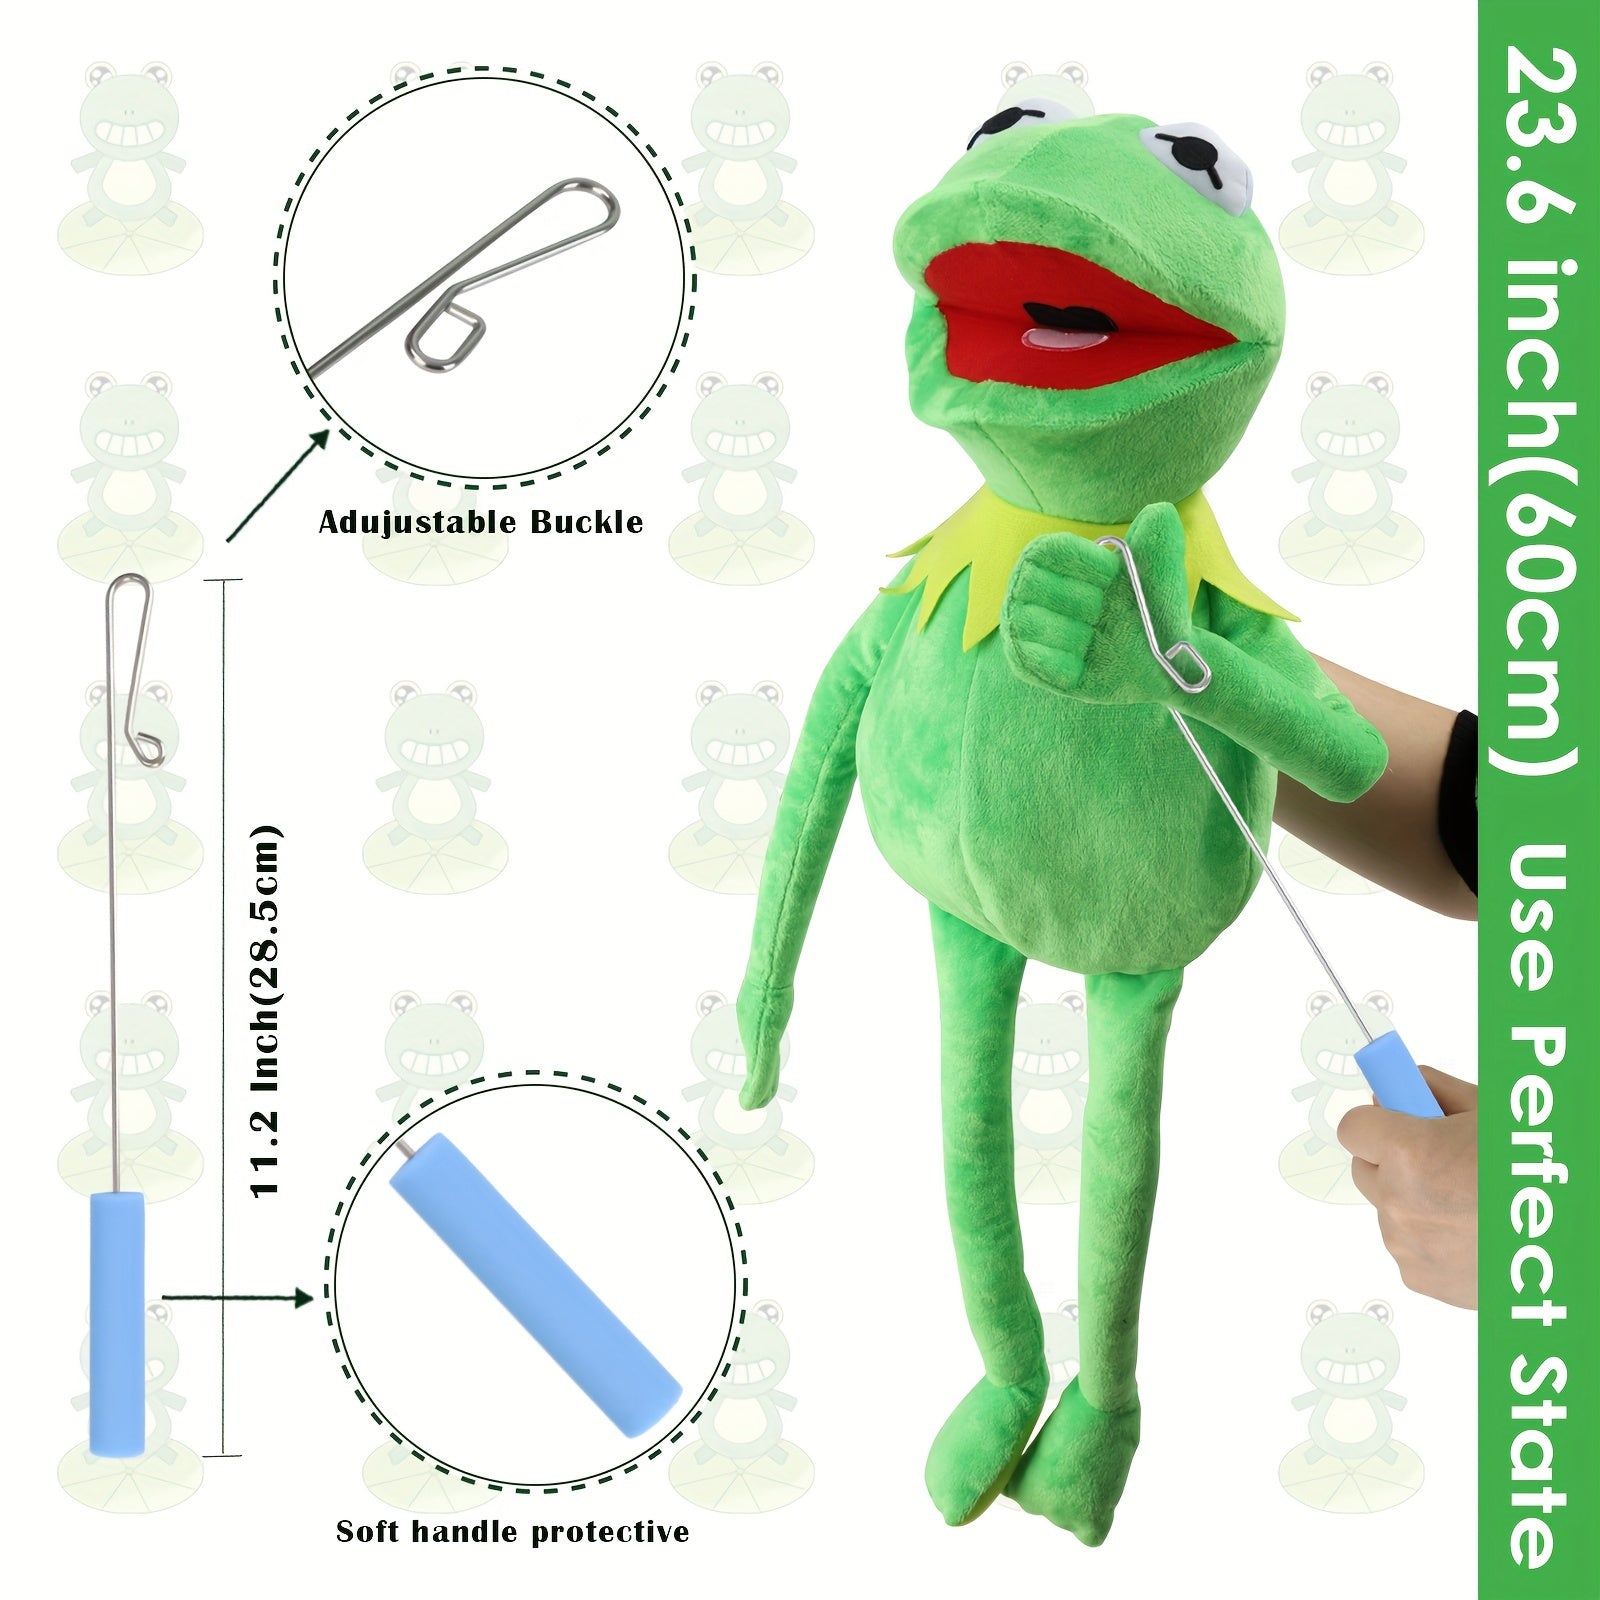 Kermit Frog Puppet With Control Rod Metal Puppet Set,The Muppets Show, Soft Plush Frog Puppet Doll Suitable For Role Play -Green, 24 Inches - Cykapu